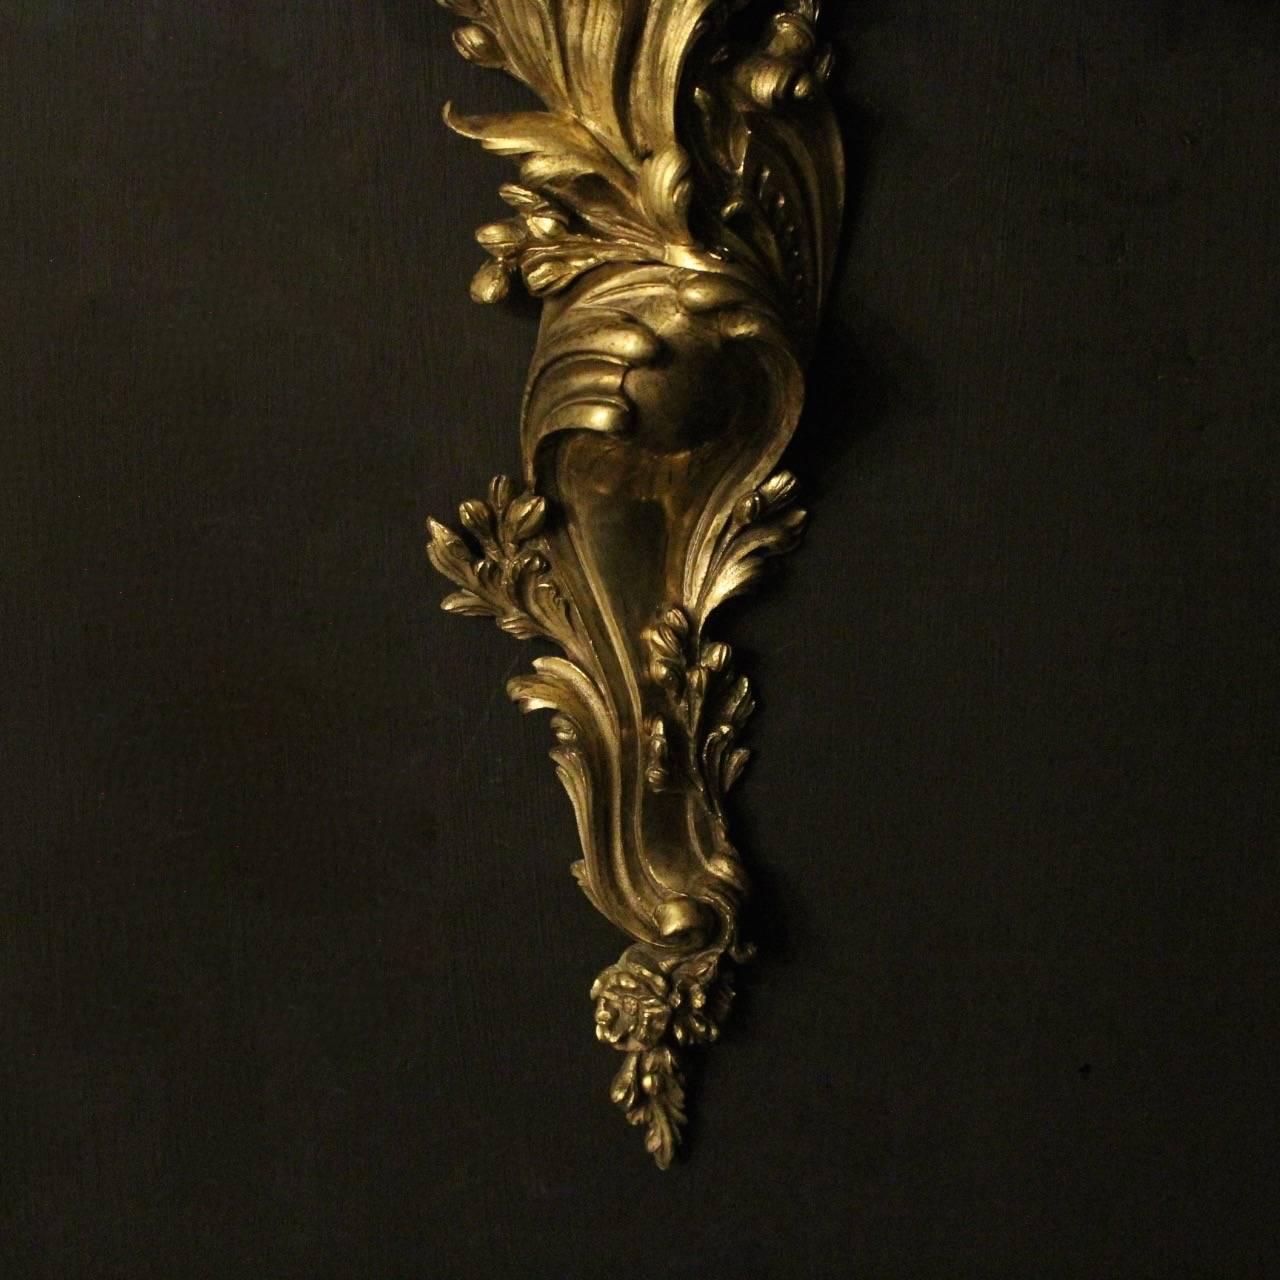 A large French pair of gilded bronze triple arm antique wall sconces, the ornate leaf scrolling arms with leaf bobeches drip pans, issuing from a decoratively cast elongated tapering leaf backplate with central cartouche, excellent original